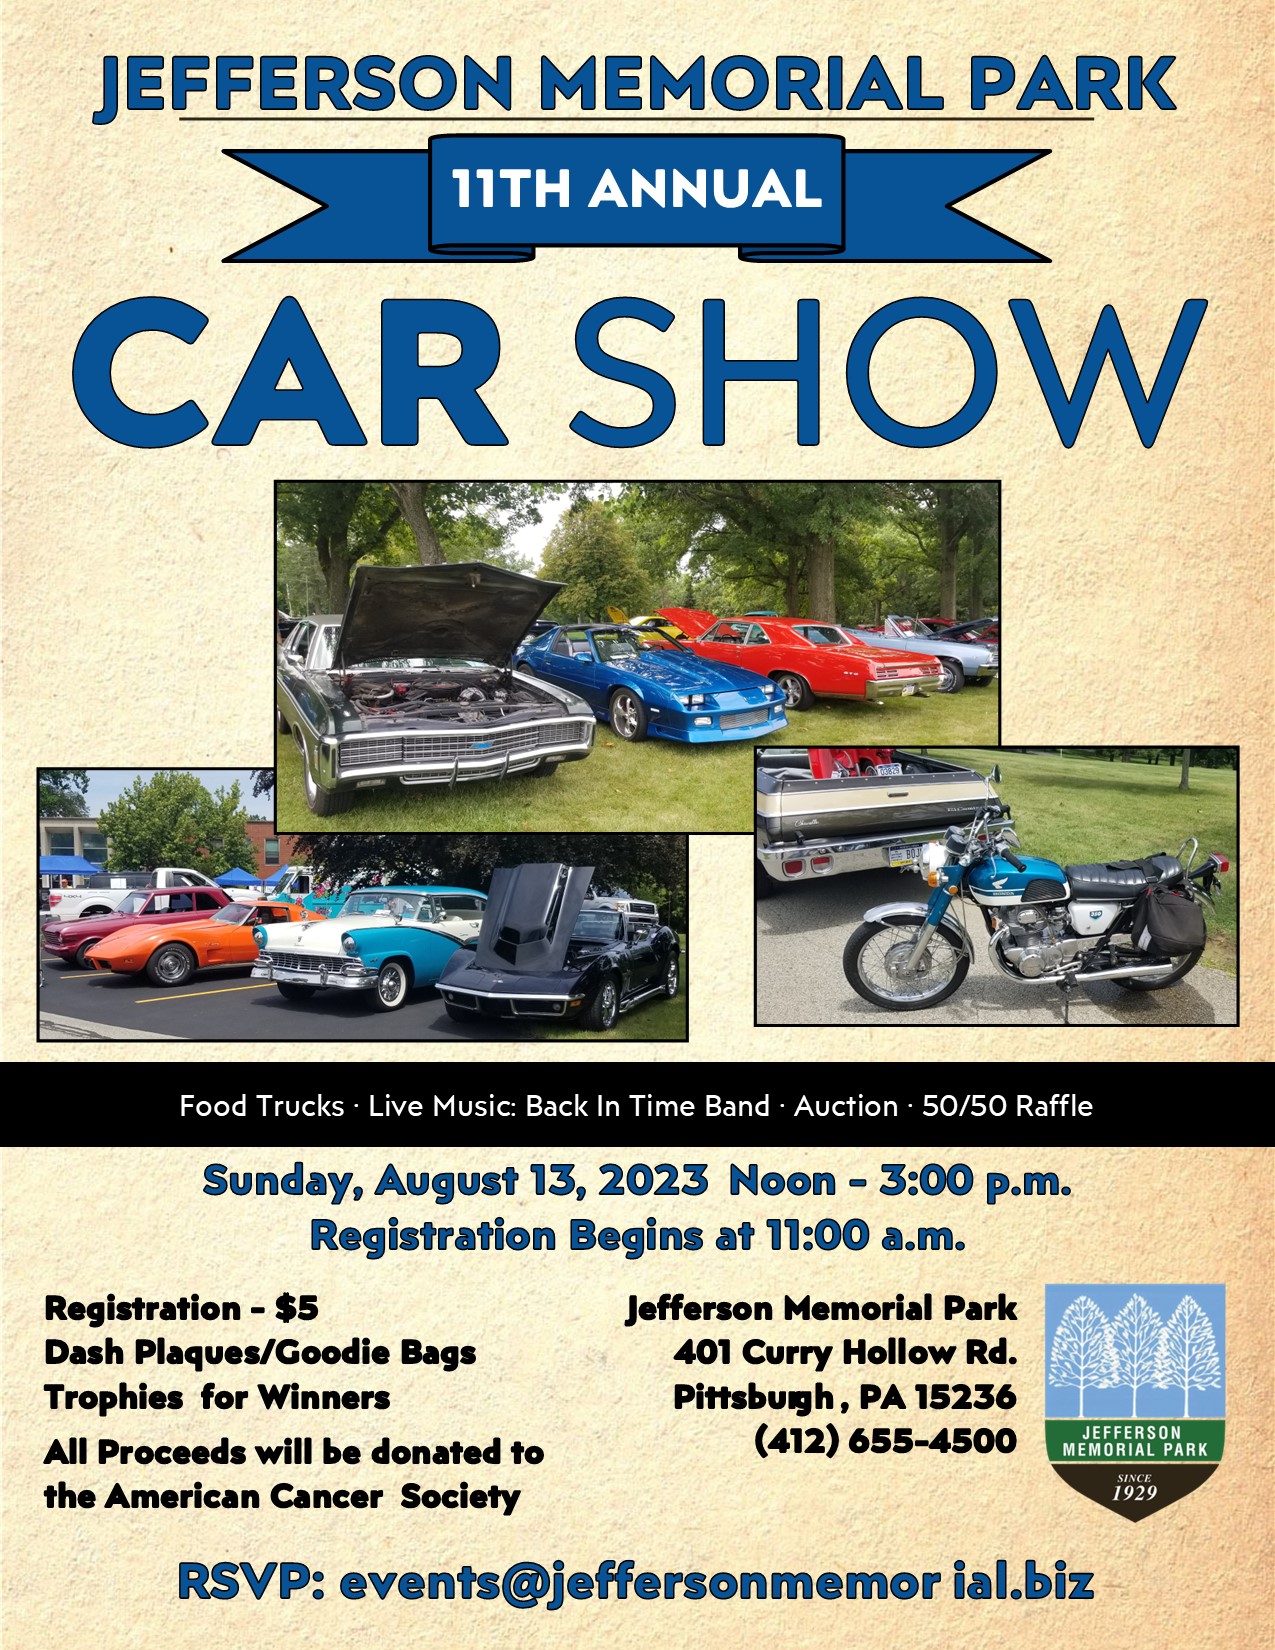 Jefferson Memorial Park's 11th Annual Car Show 401 Curry Hollow Road